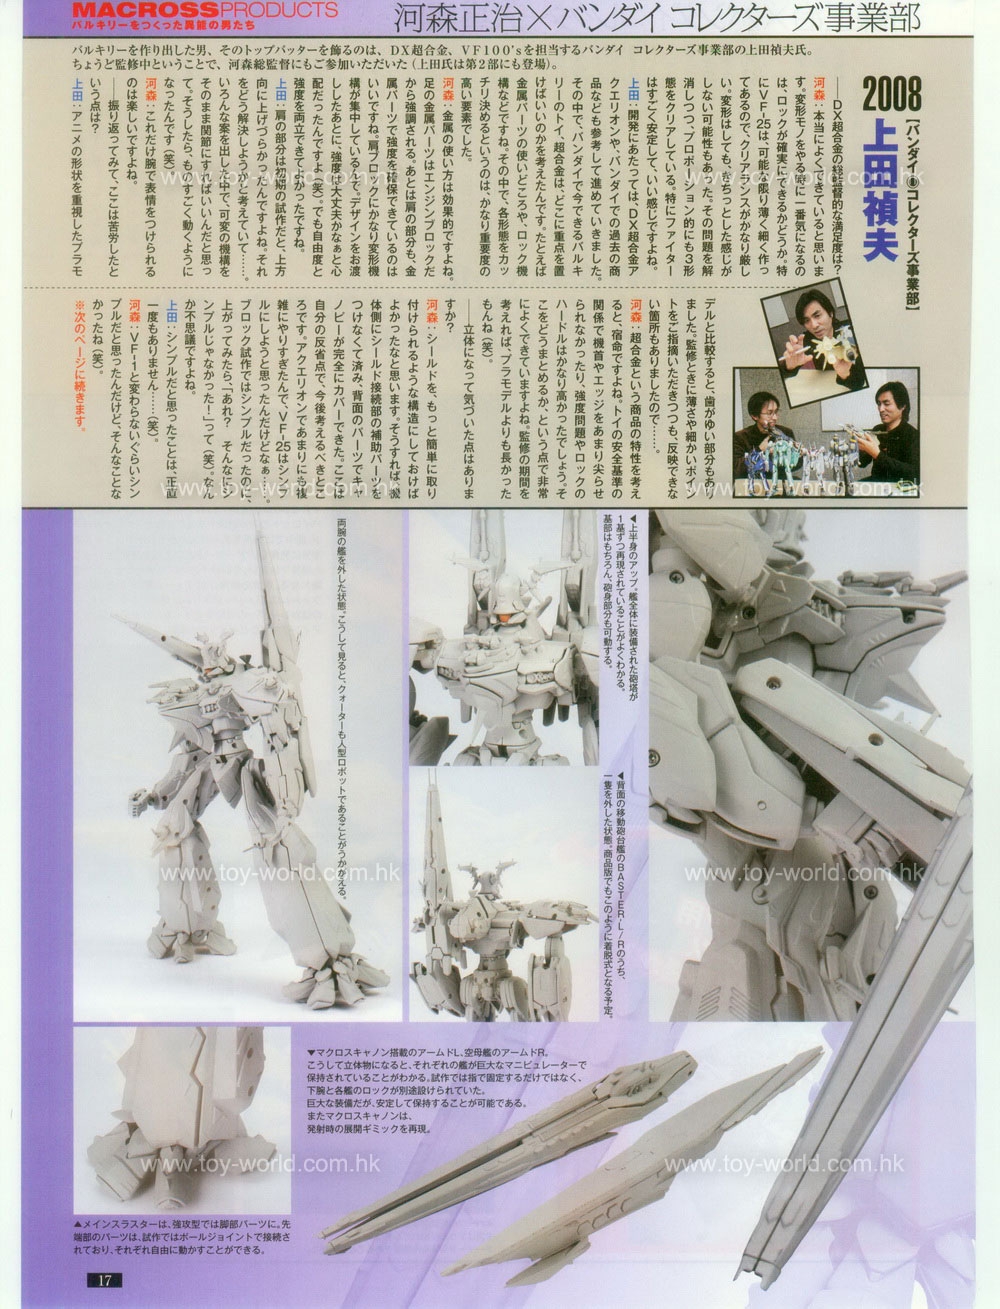 Figure OH No.134 - Special Feature: MACROSS Products 15